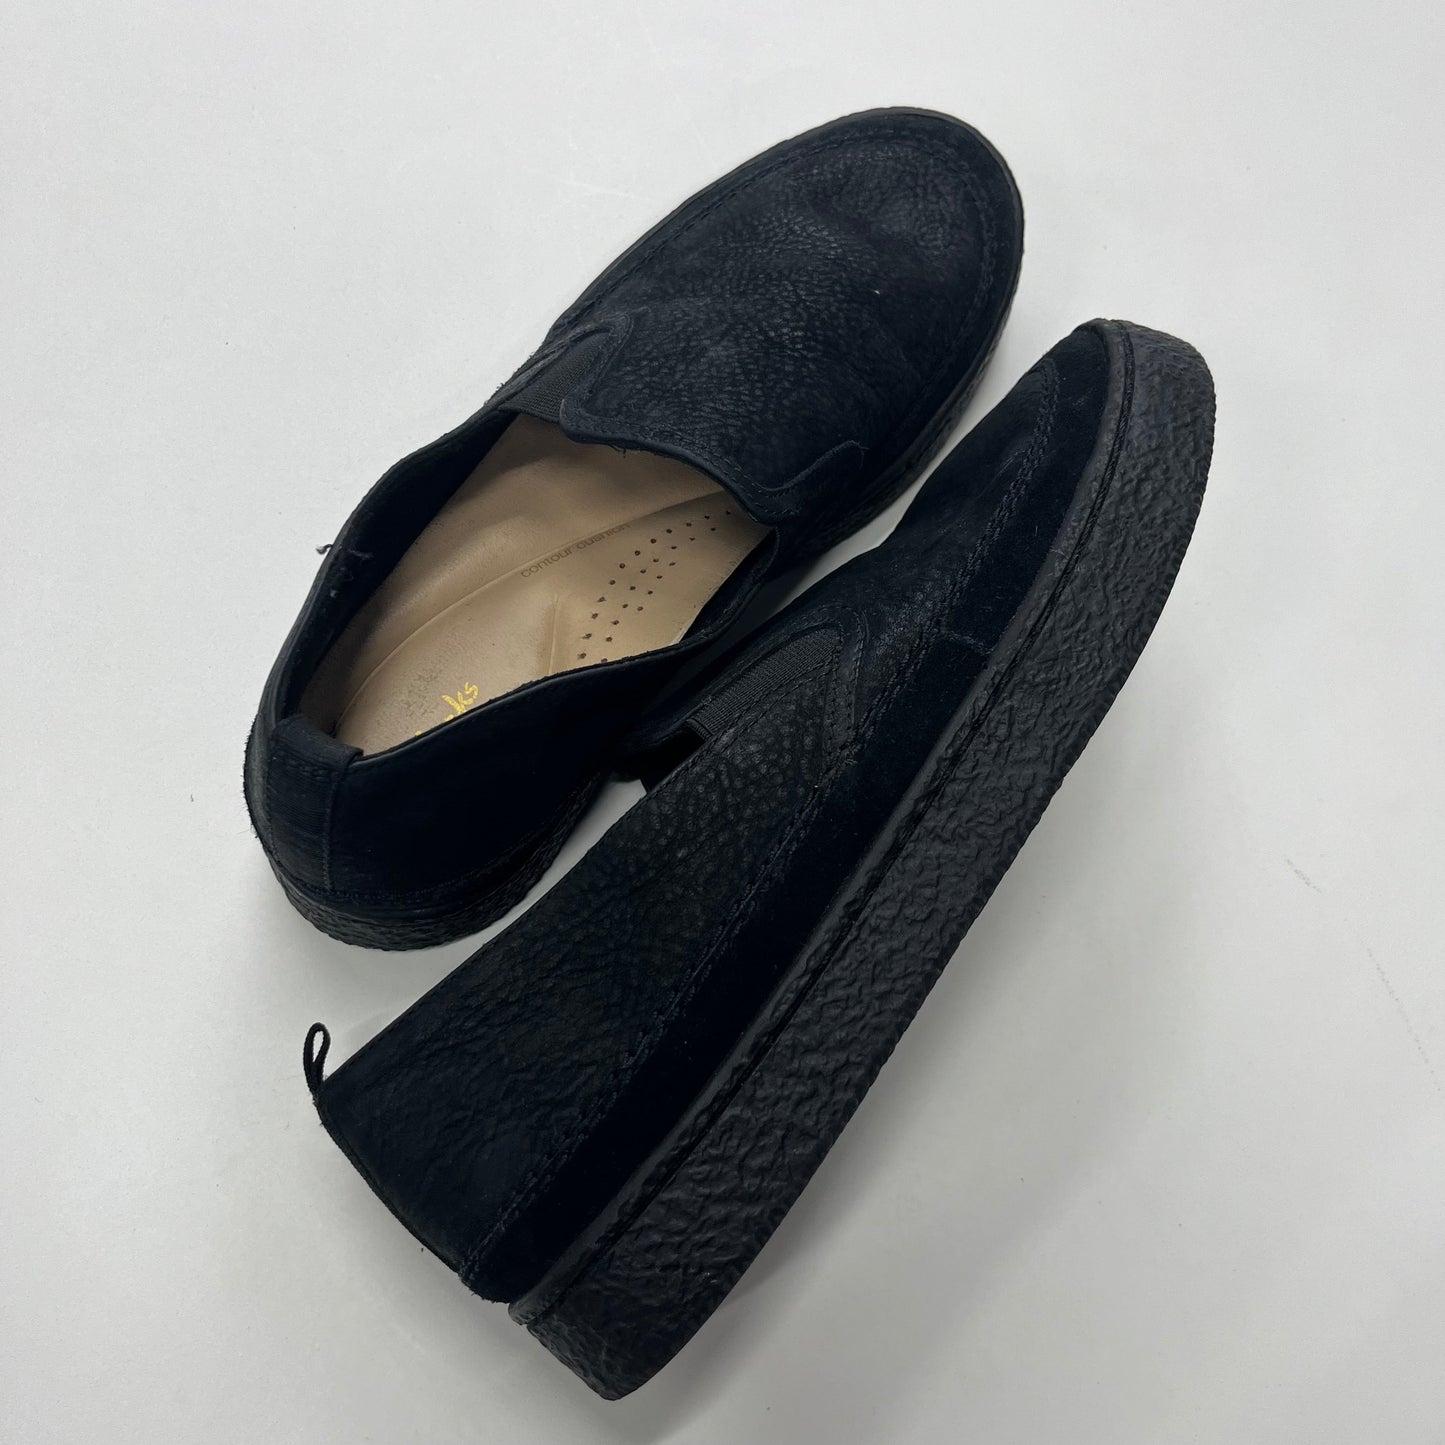 Shoes Flats Loafer Oxford By Clarks  Size: 9